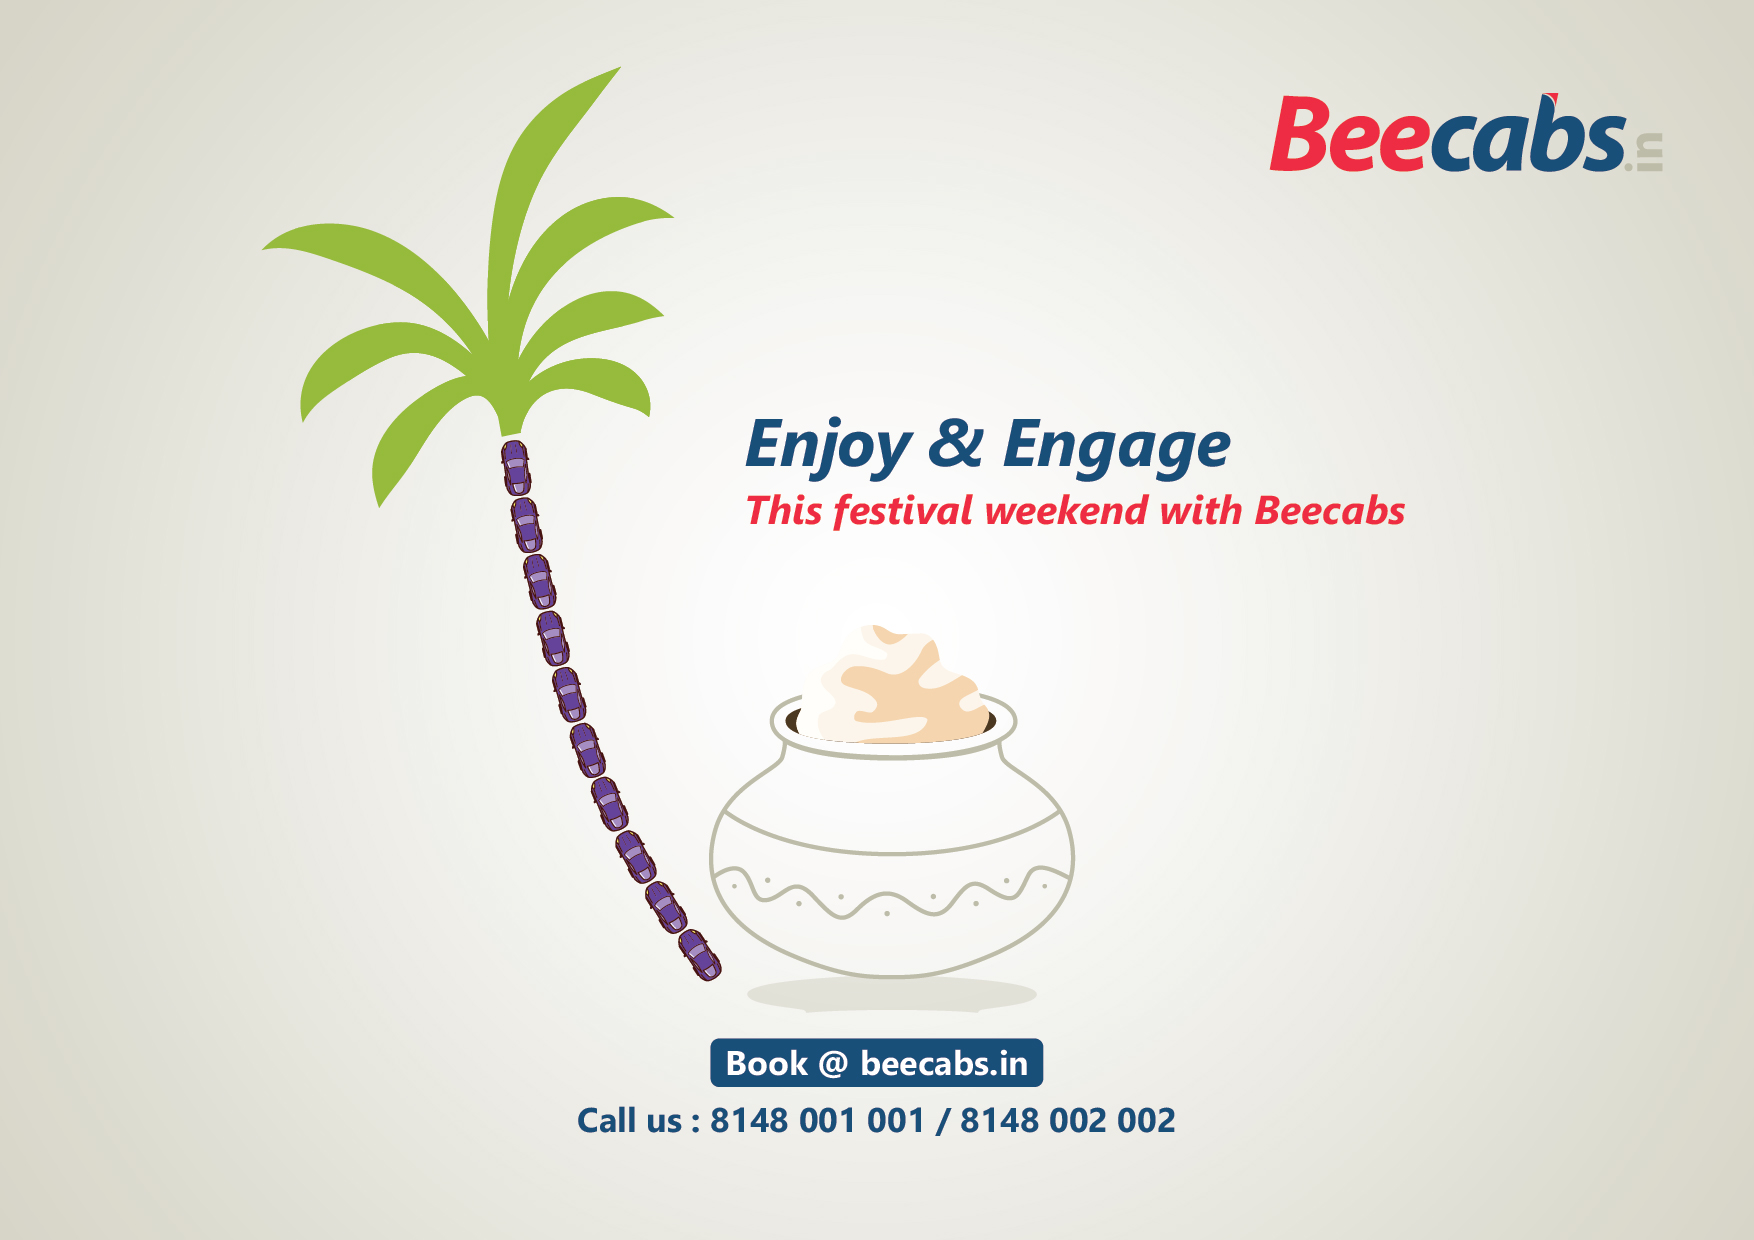 Happy Pongal - Beecabs.jpg  by beecabs